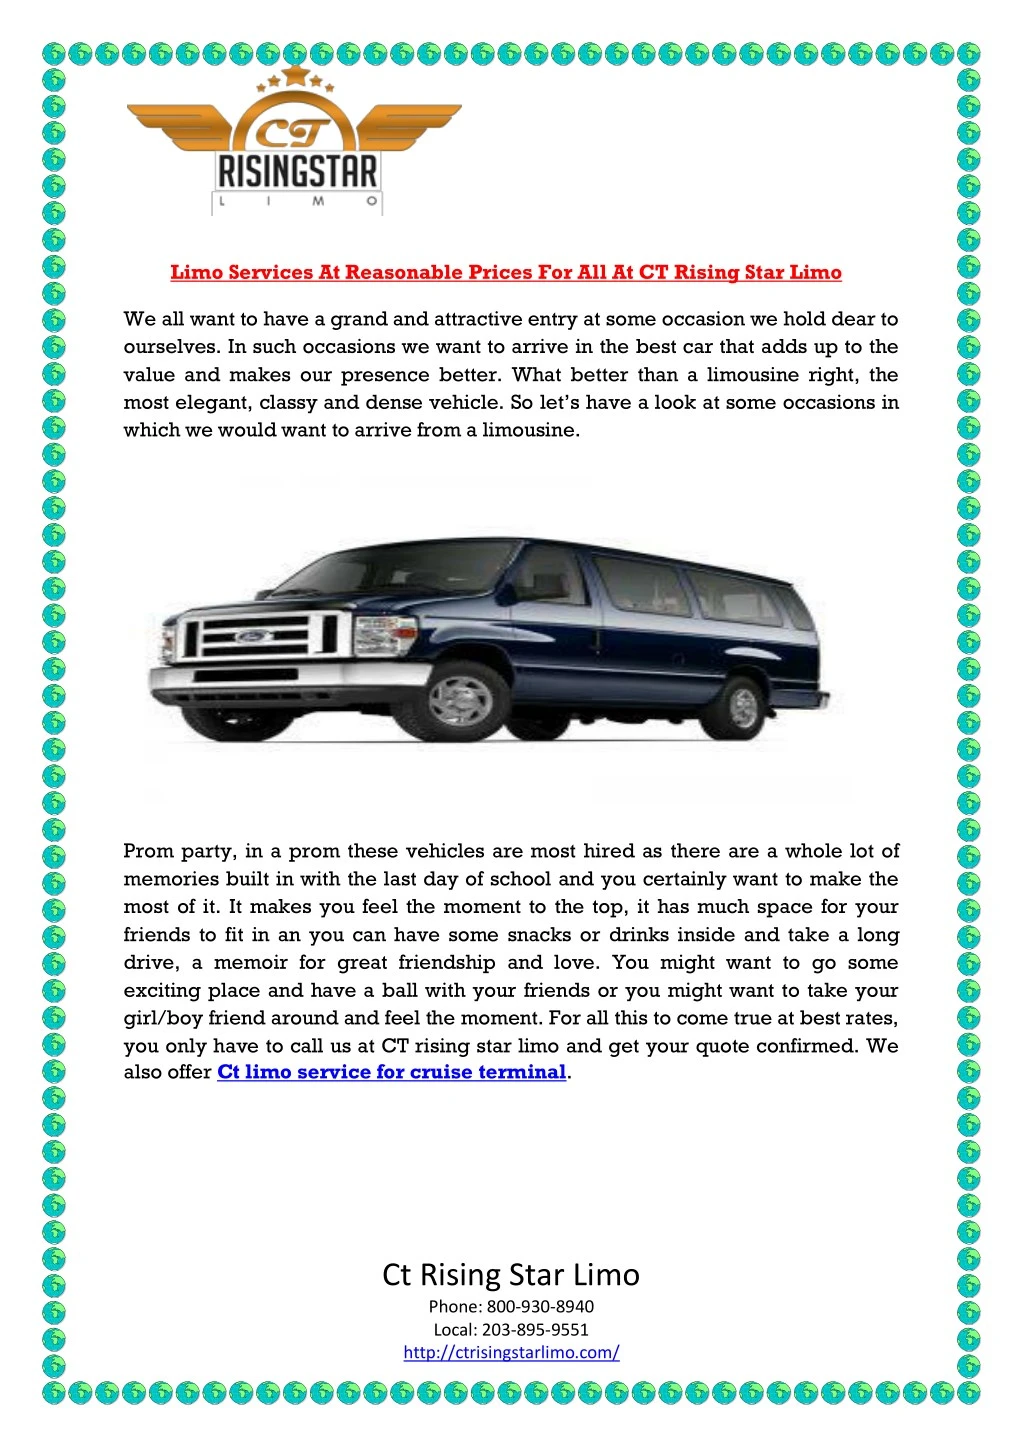 limo services at reasonable prices